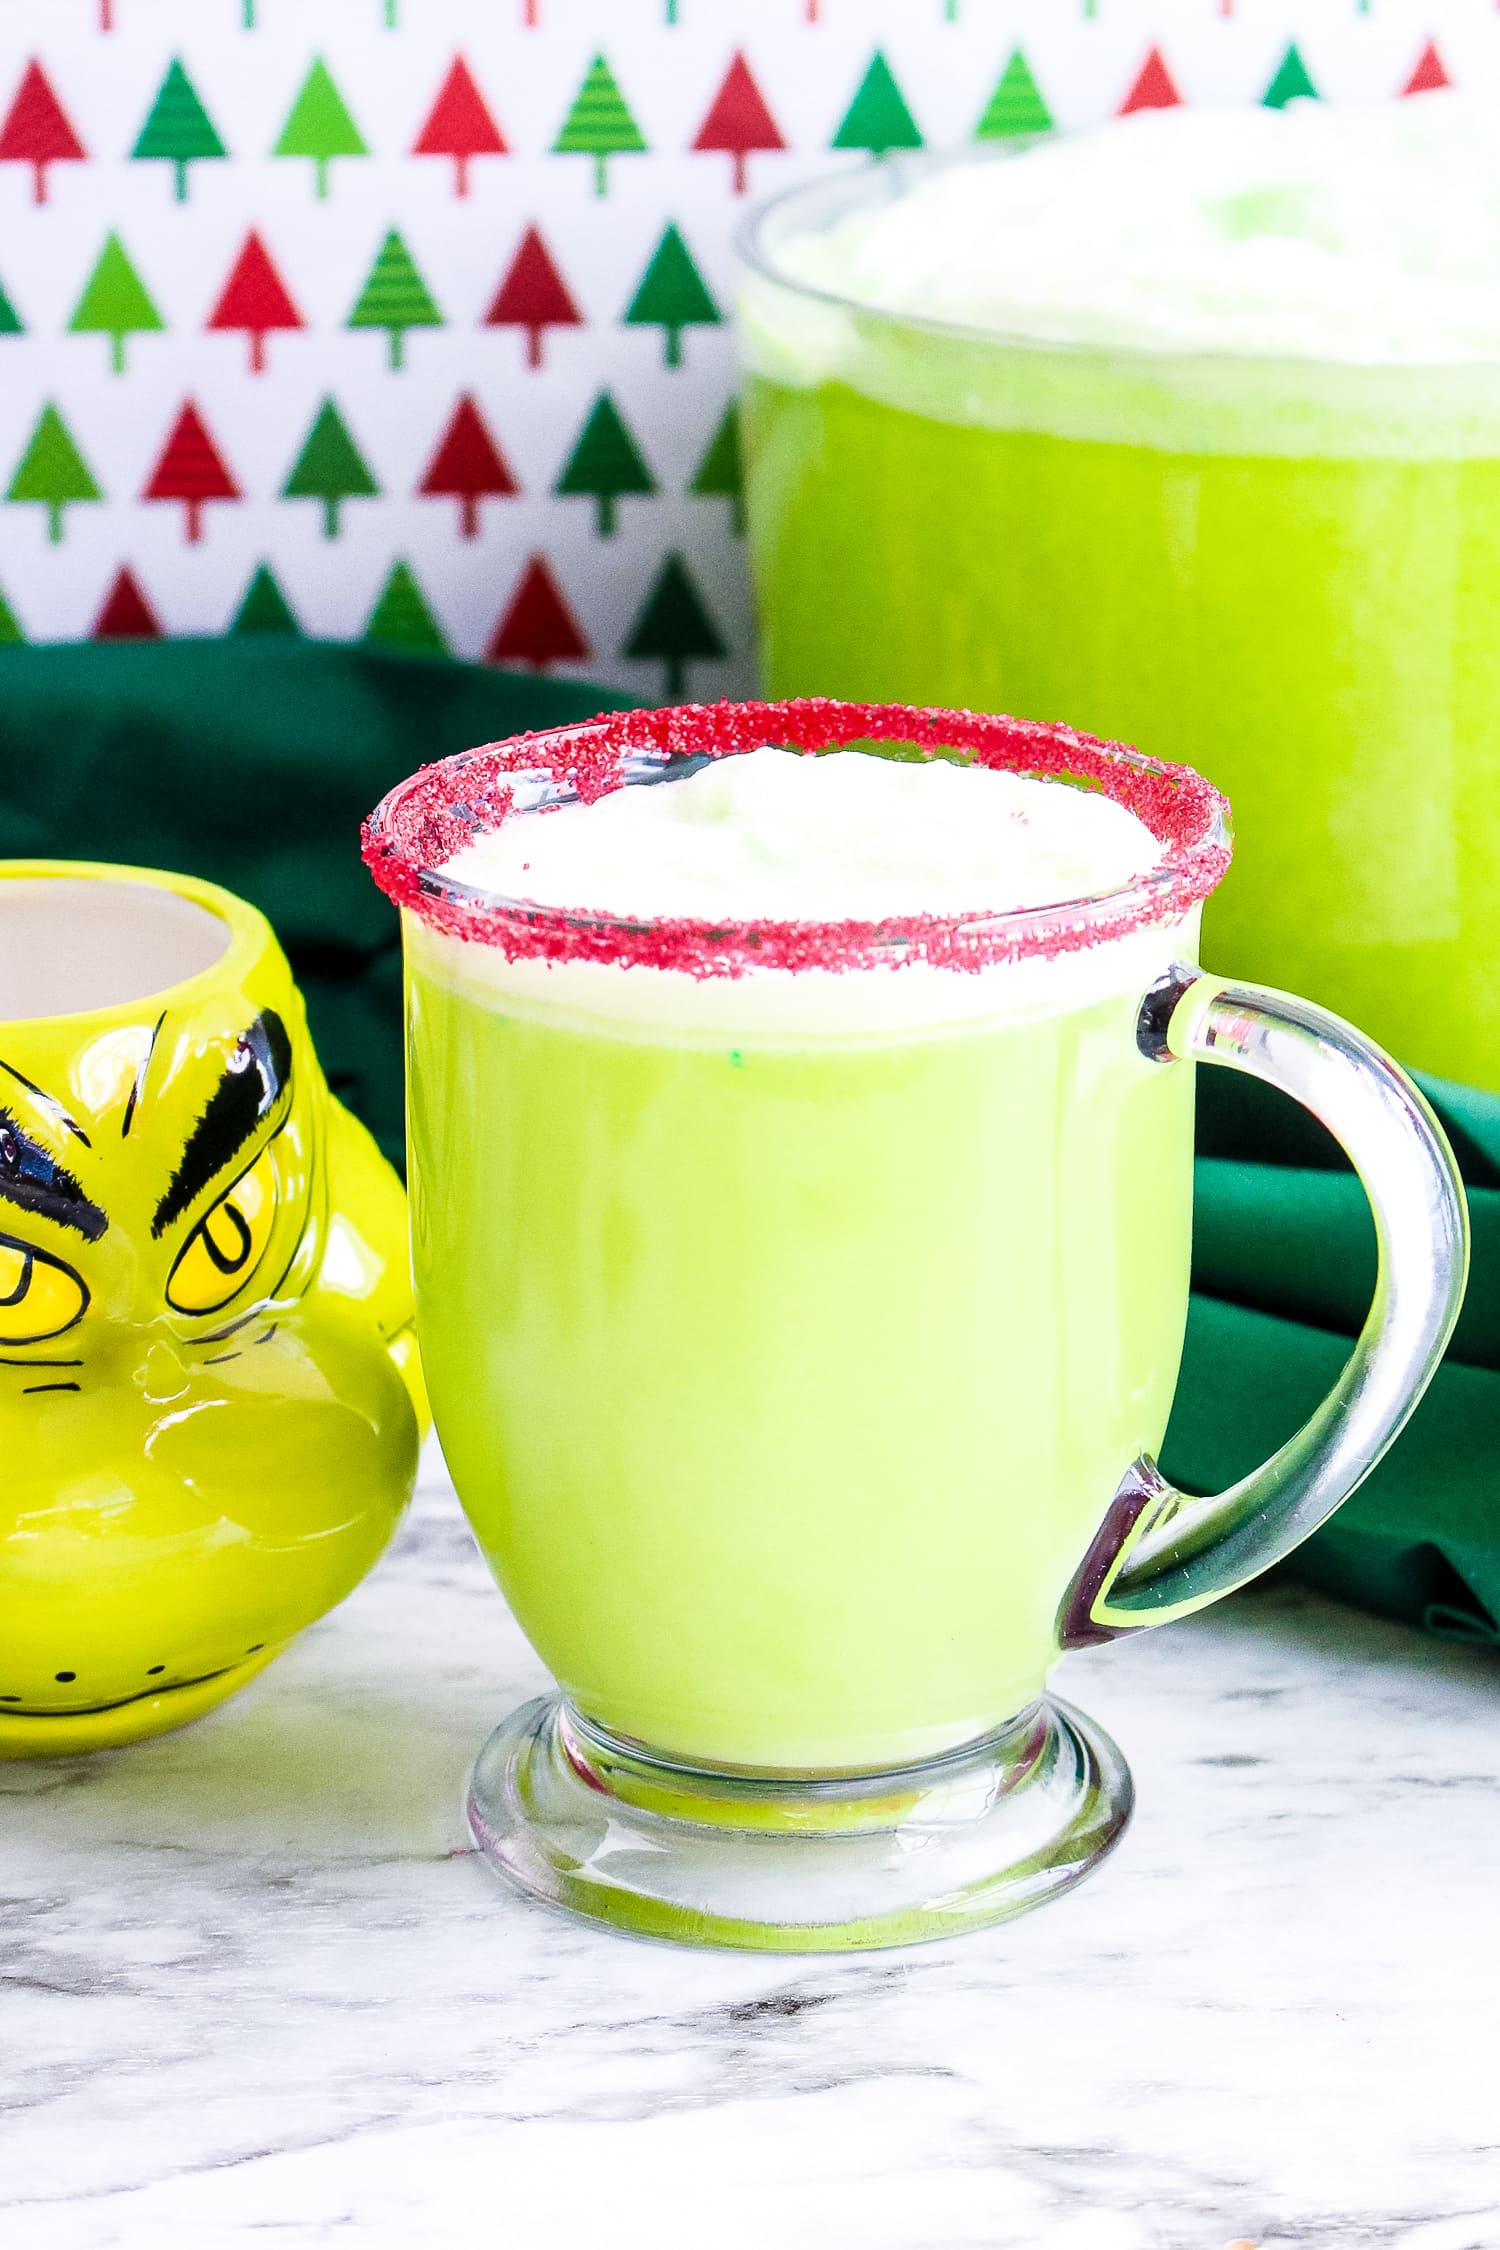 Mug of Grinch Punch with red sugar sand on rim of cup